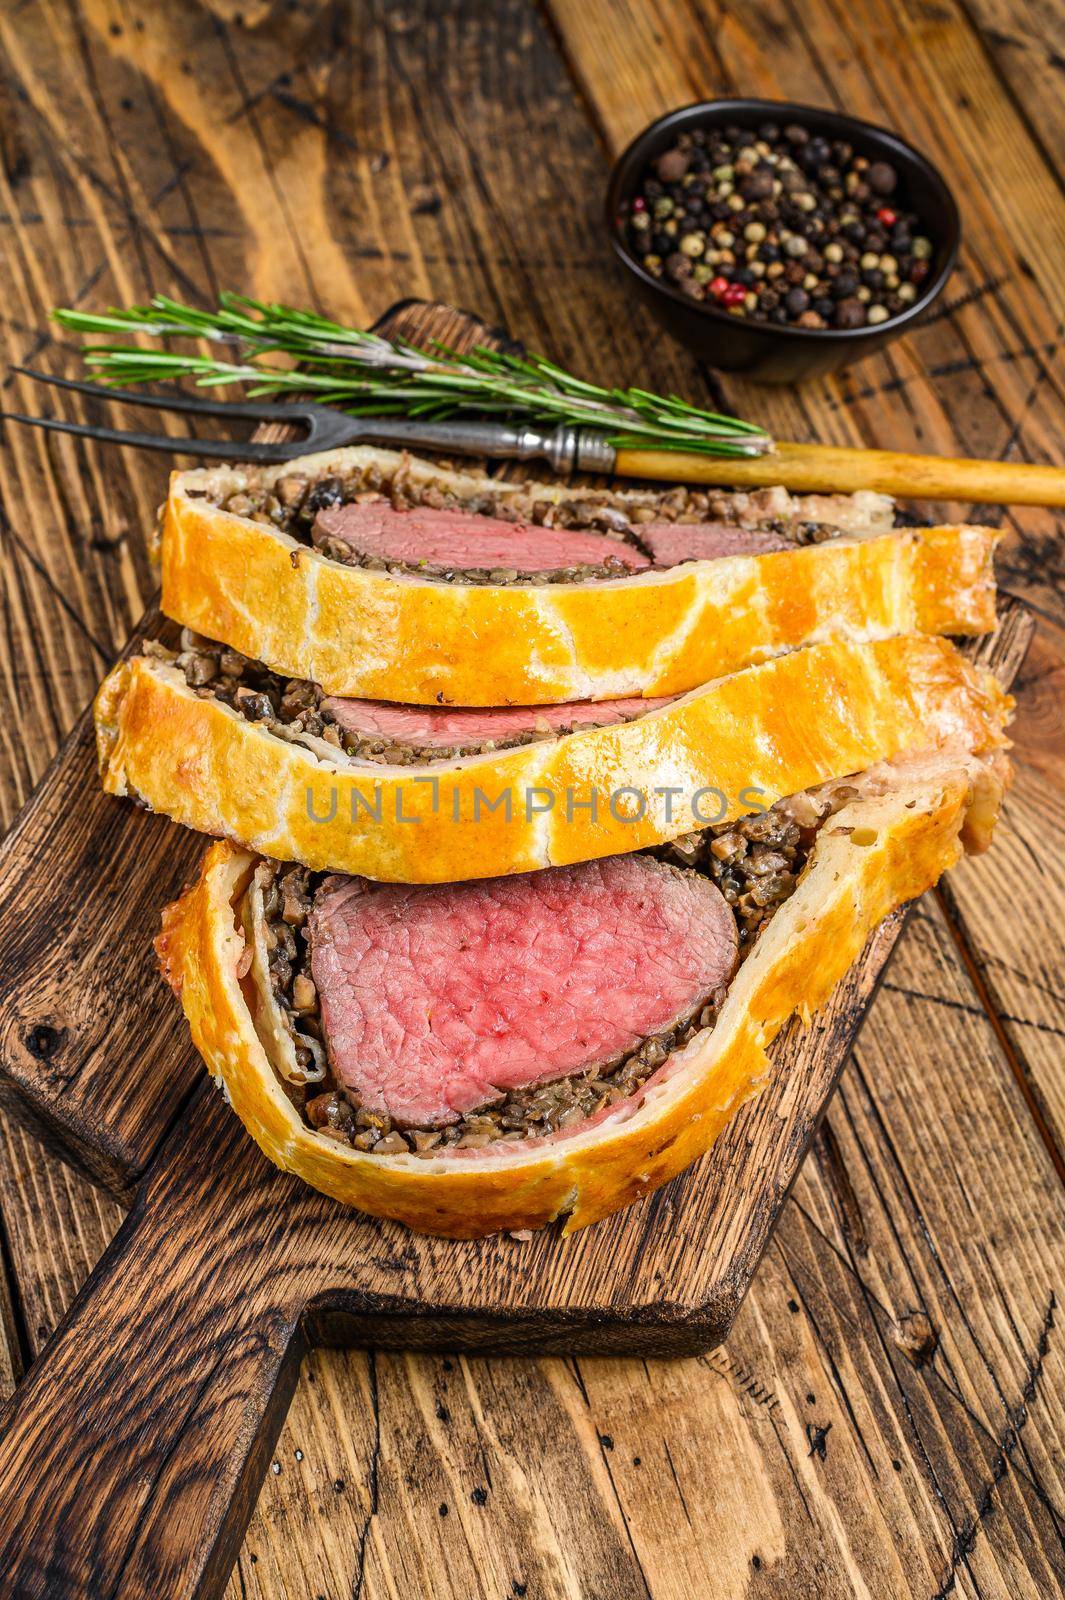 Sliced Beef Wellington pastry on a wooden cutting board. wooden background. Top view.